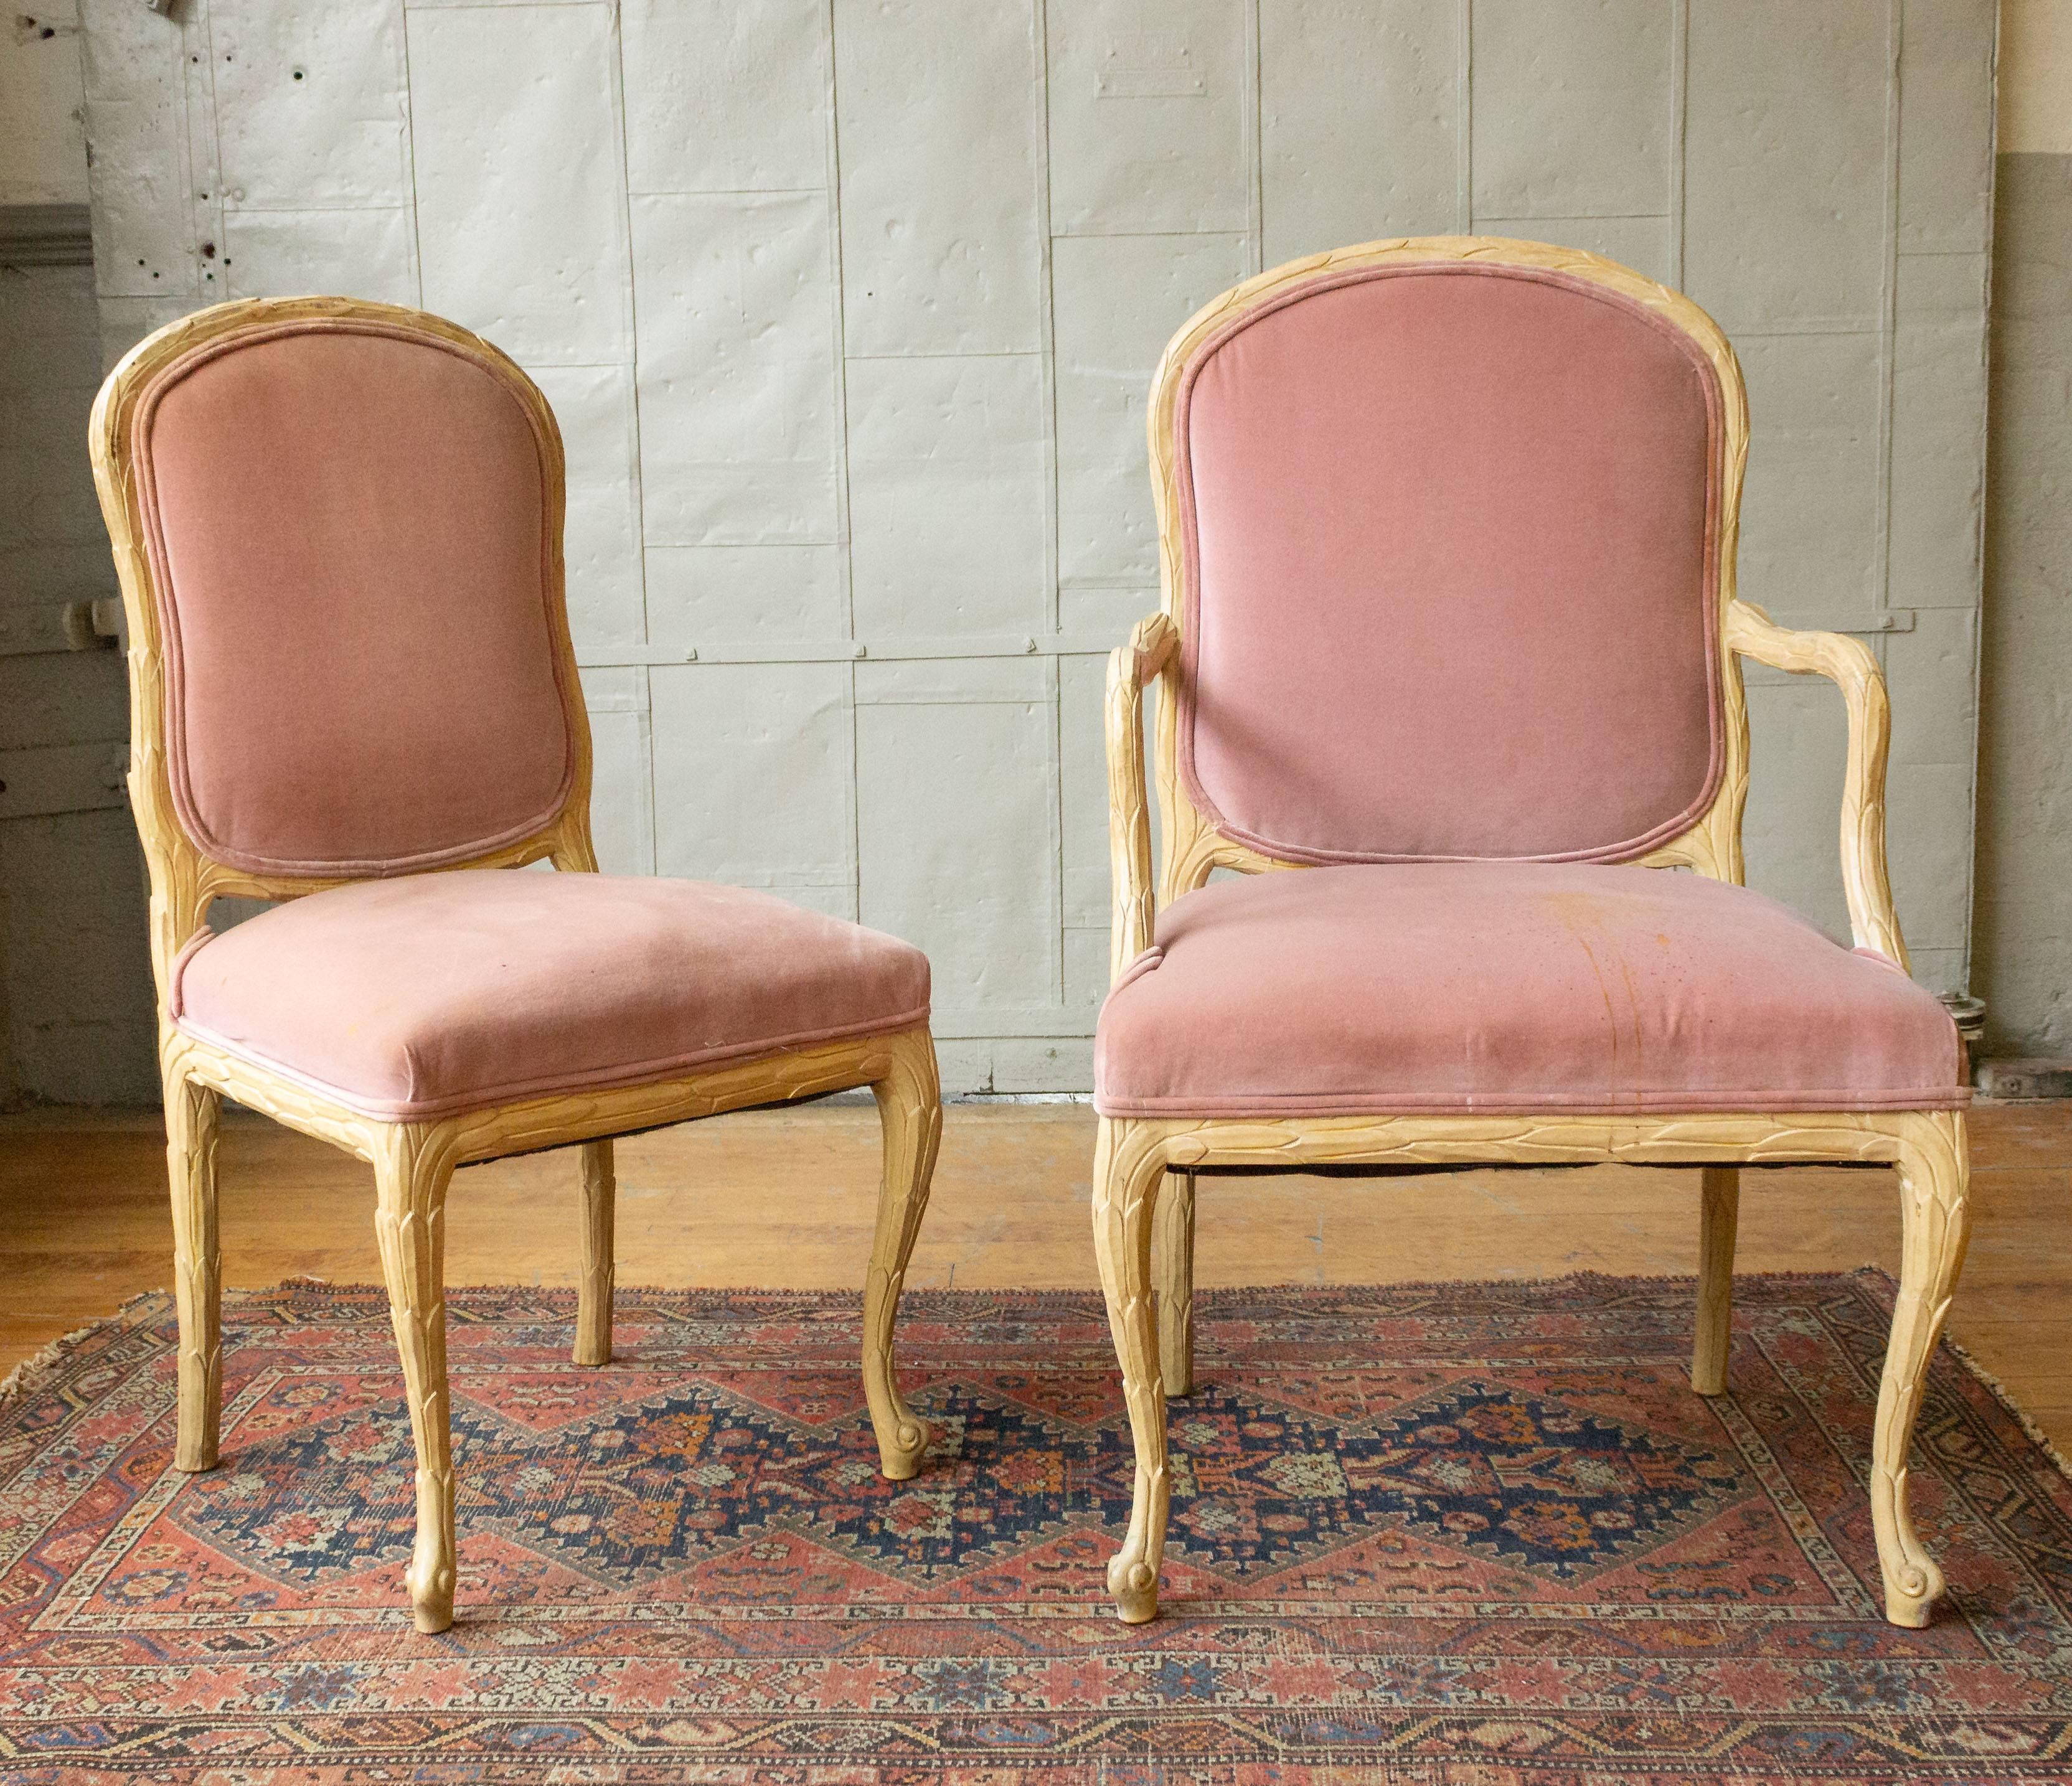 Set of six hand-carved dining chairs (two armchairs and four without arms). Frames have carved overlapping leaves in a light, natural wood. Back and seat cushions are pink and need to be reupholstered. Not only unique but also very